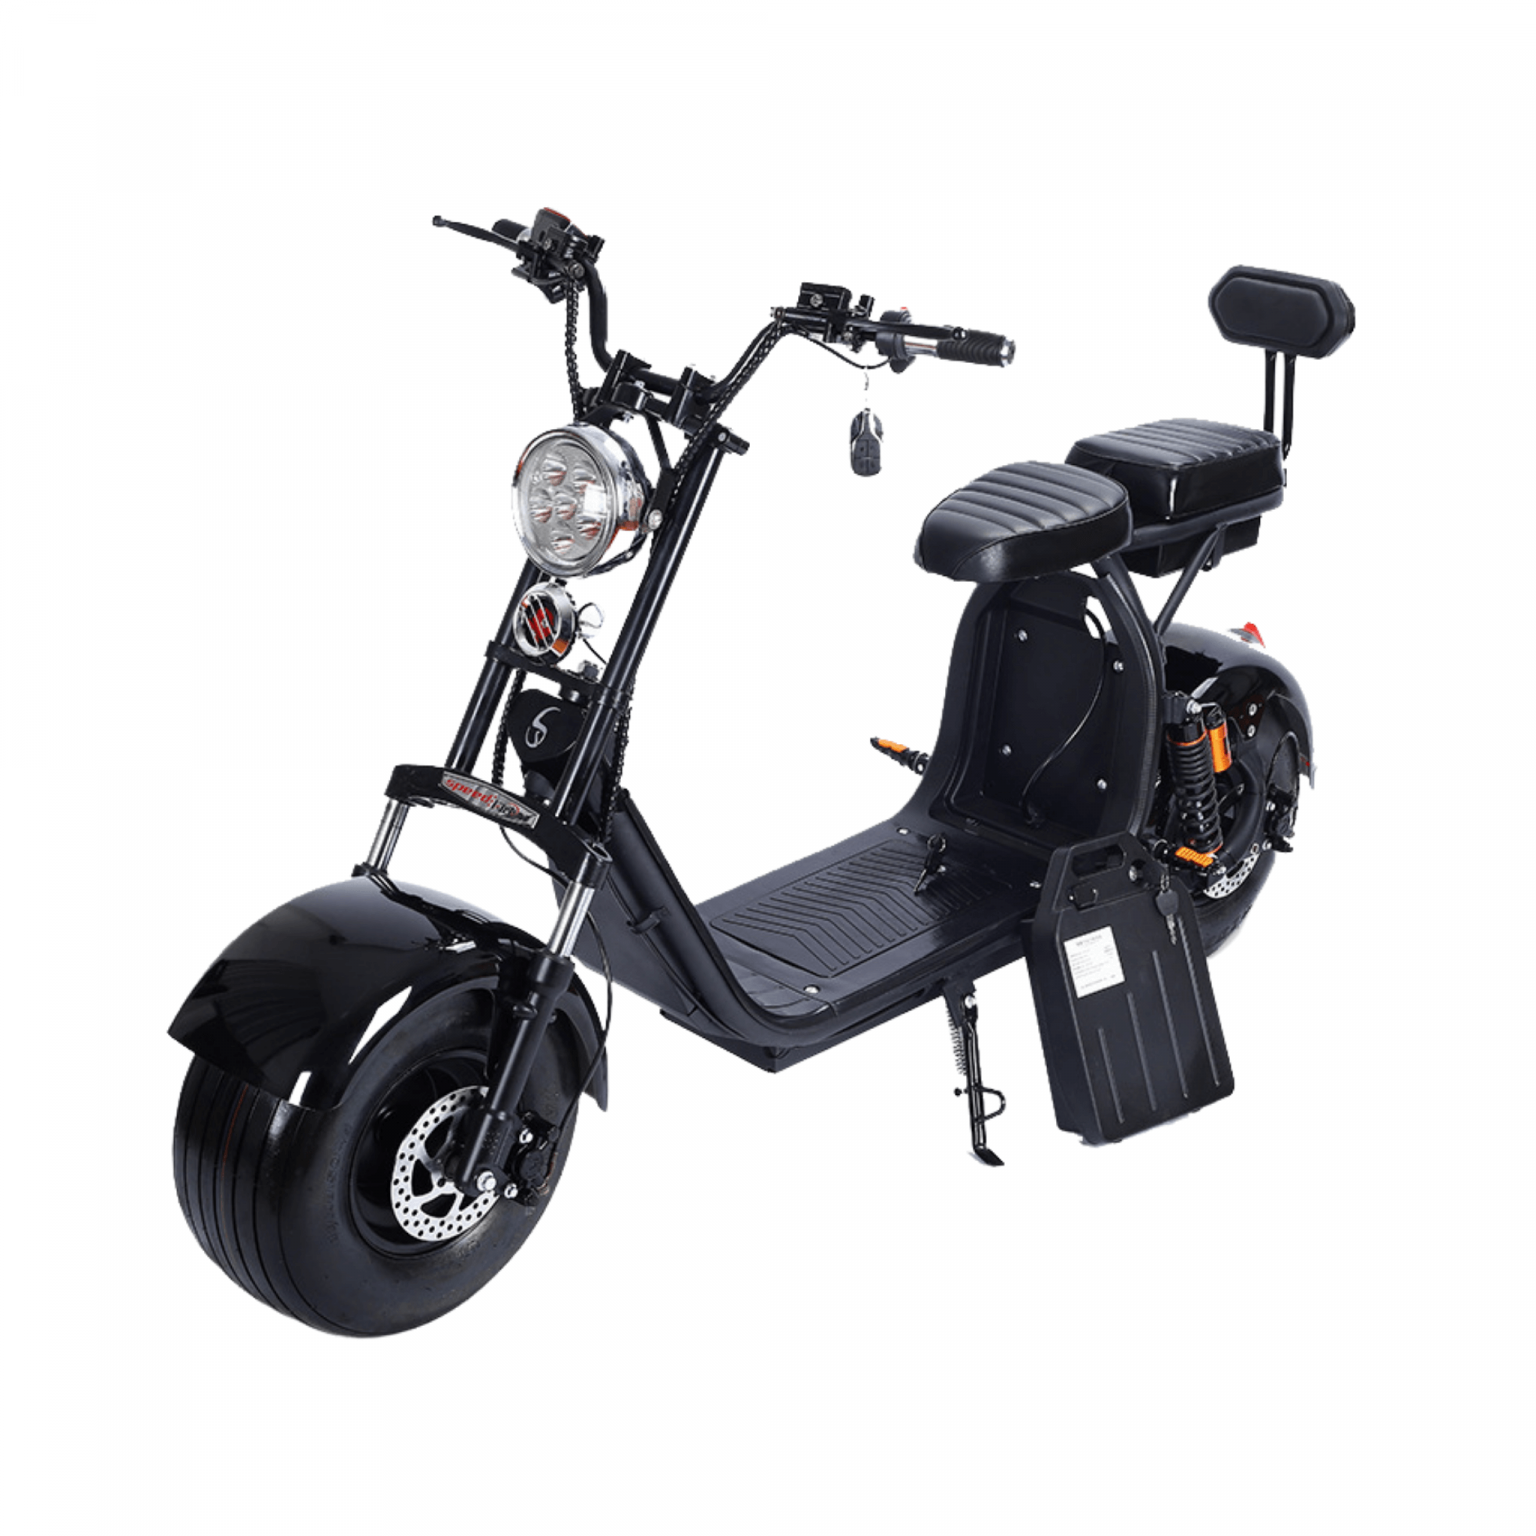 – Cruiser (2000W) City Plus Scooters